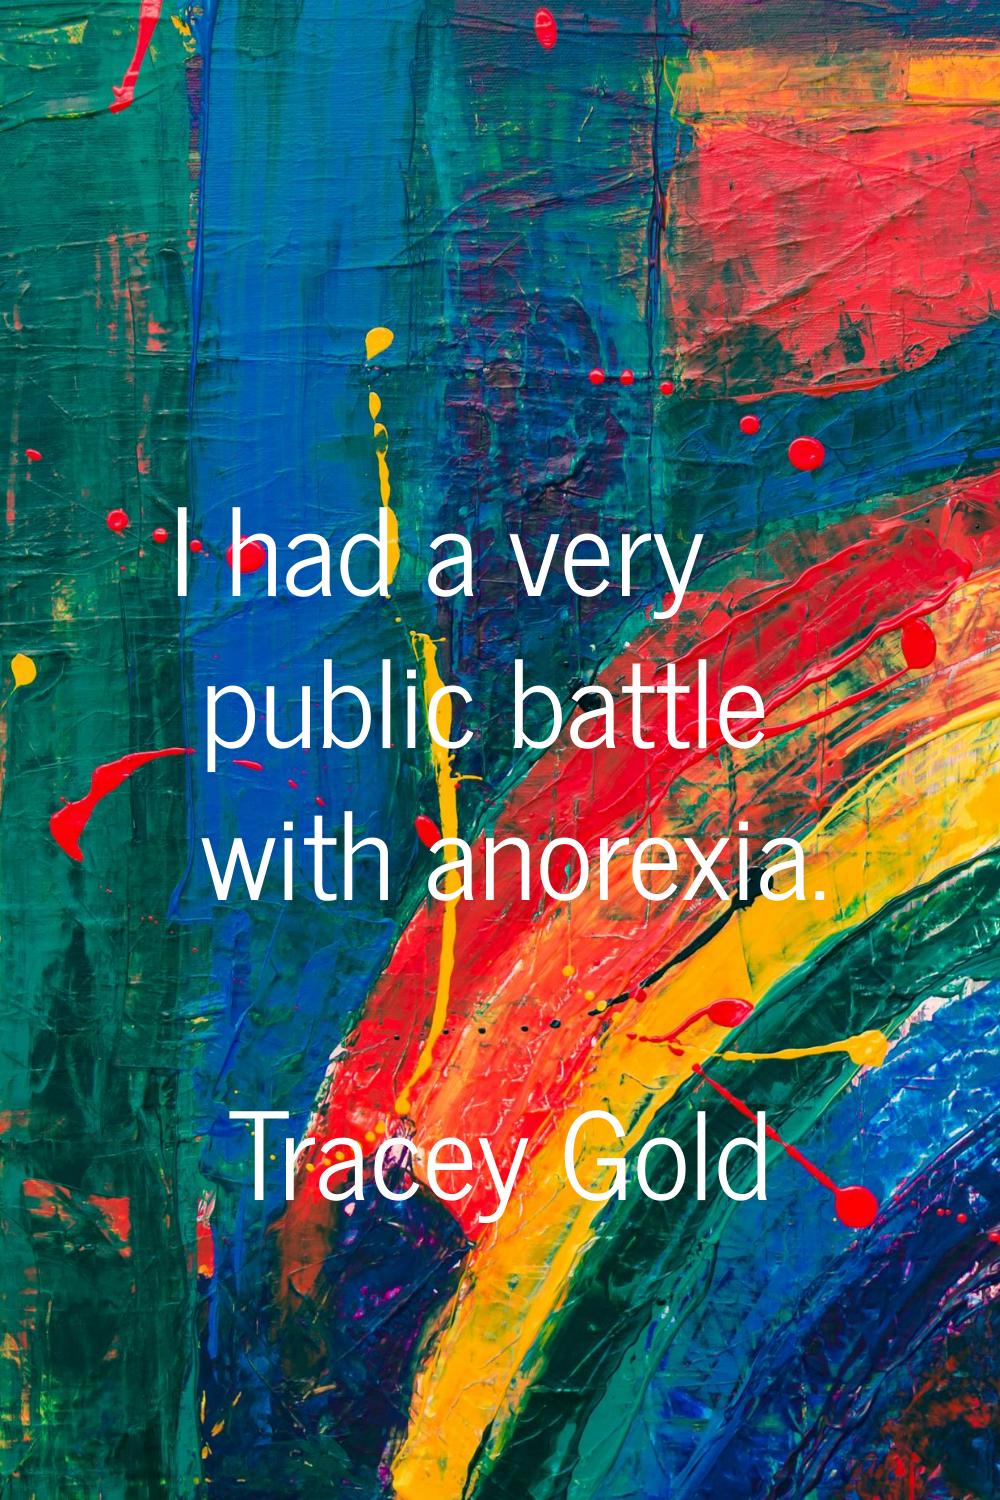 I had a very public battle with anorexia.